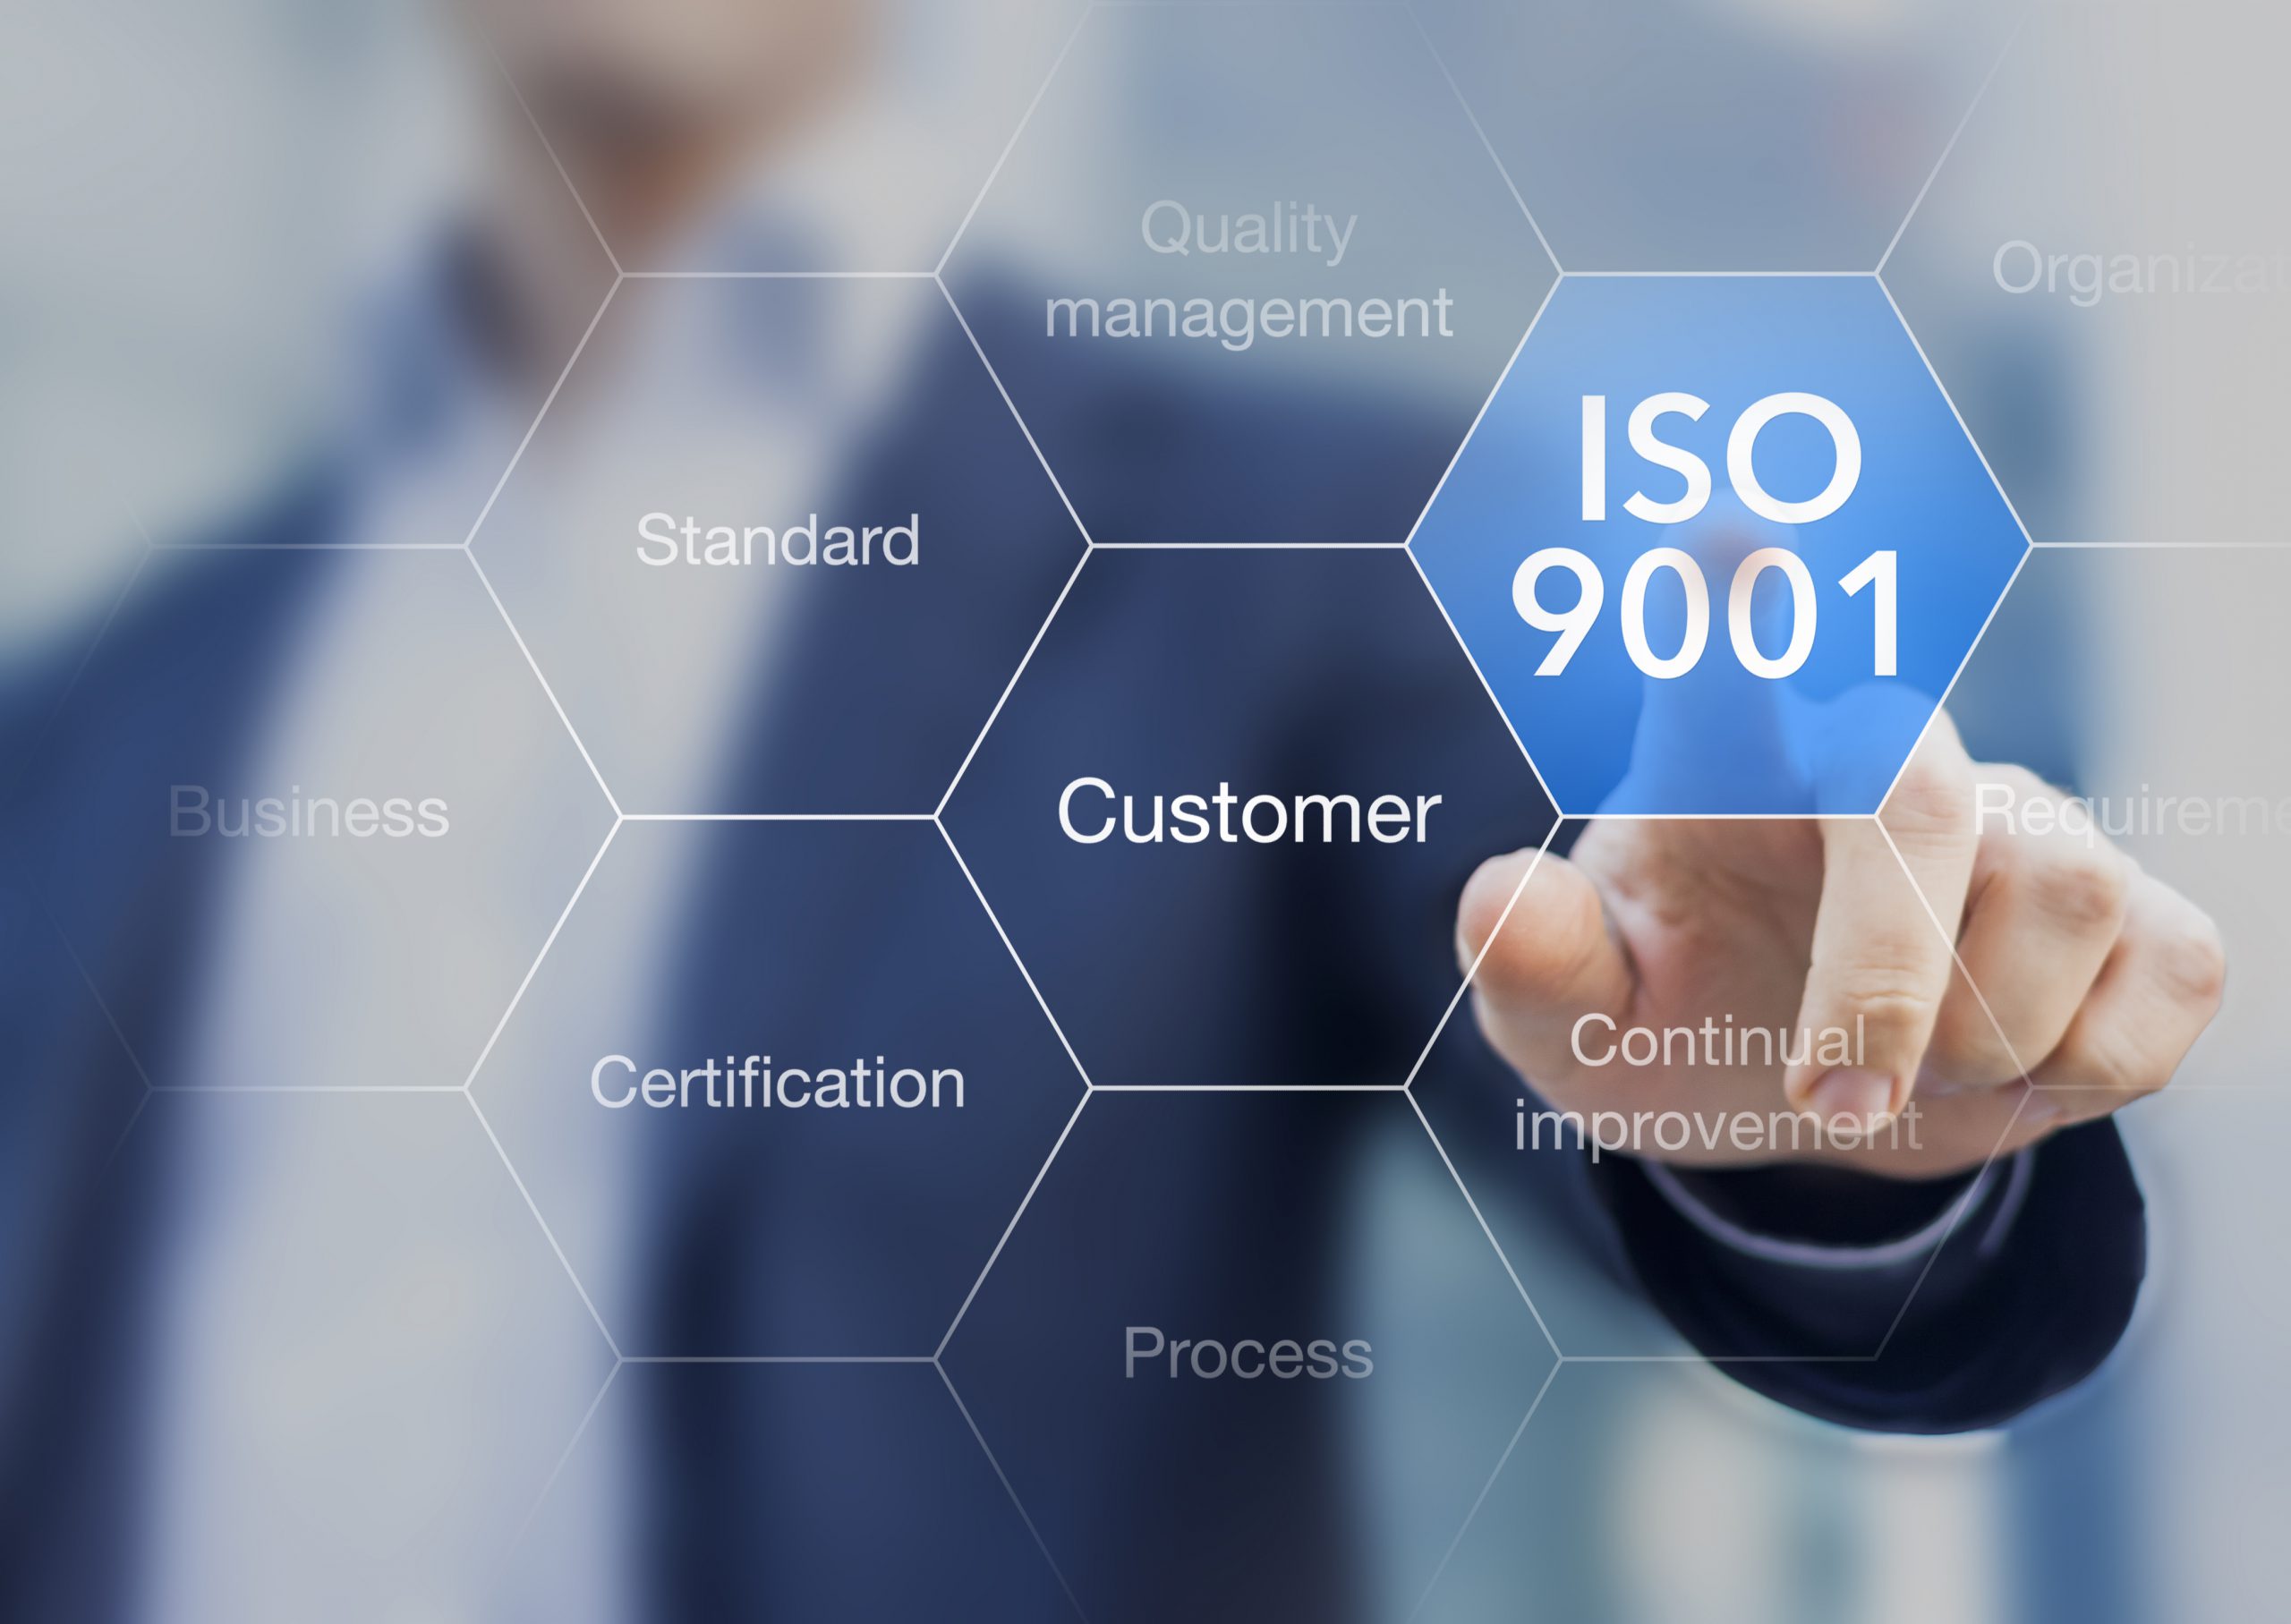 GFW Quality includes ISO 9001 standard of quality management